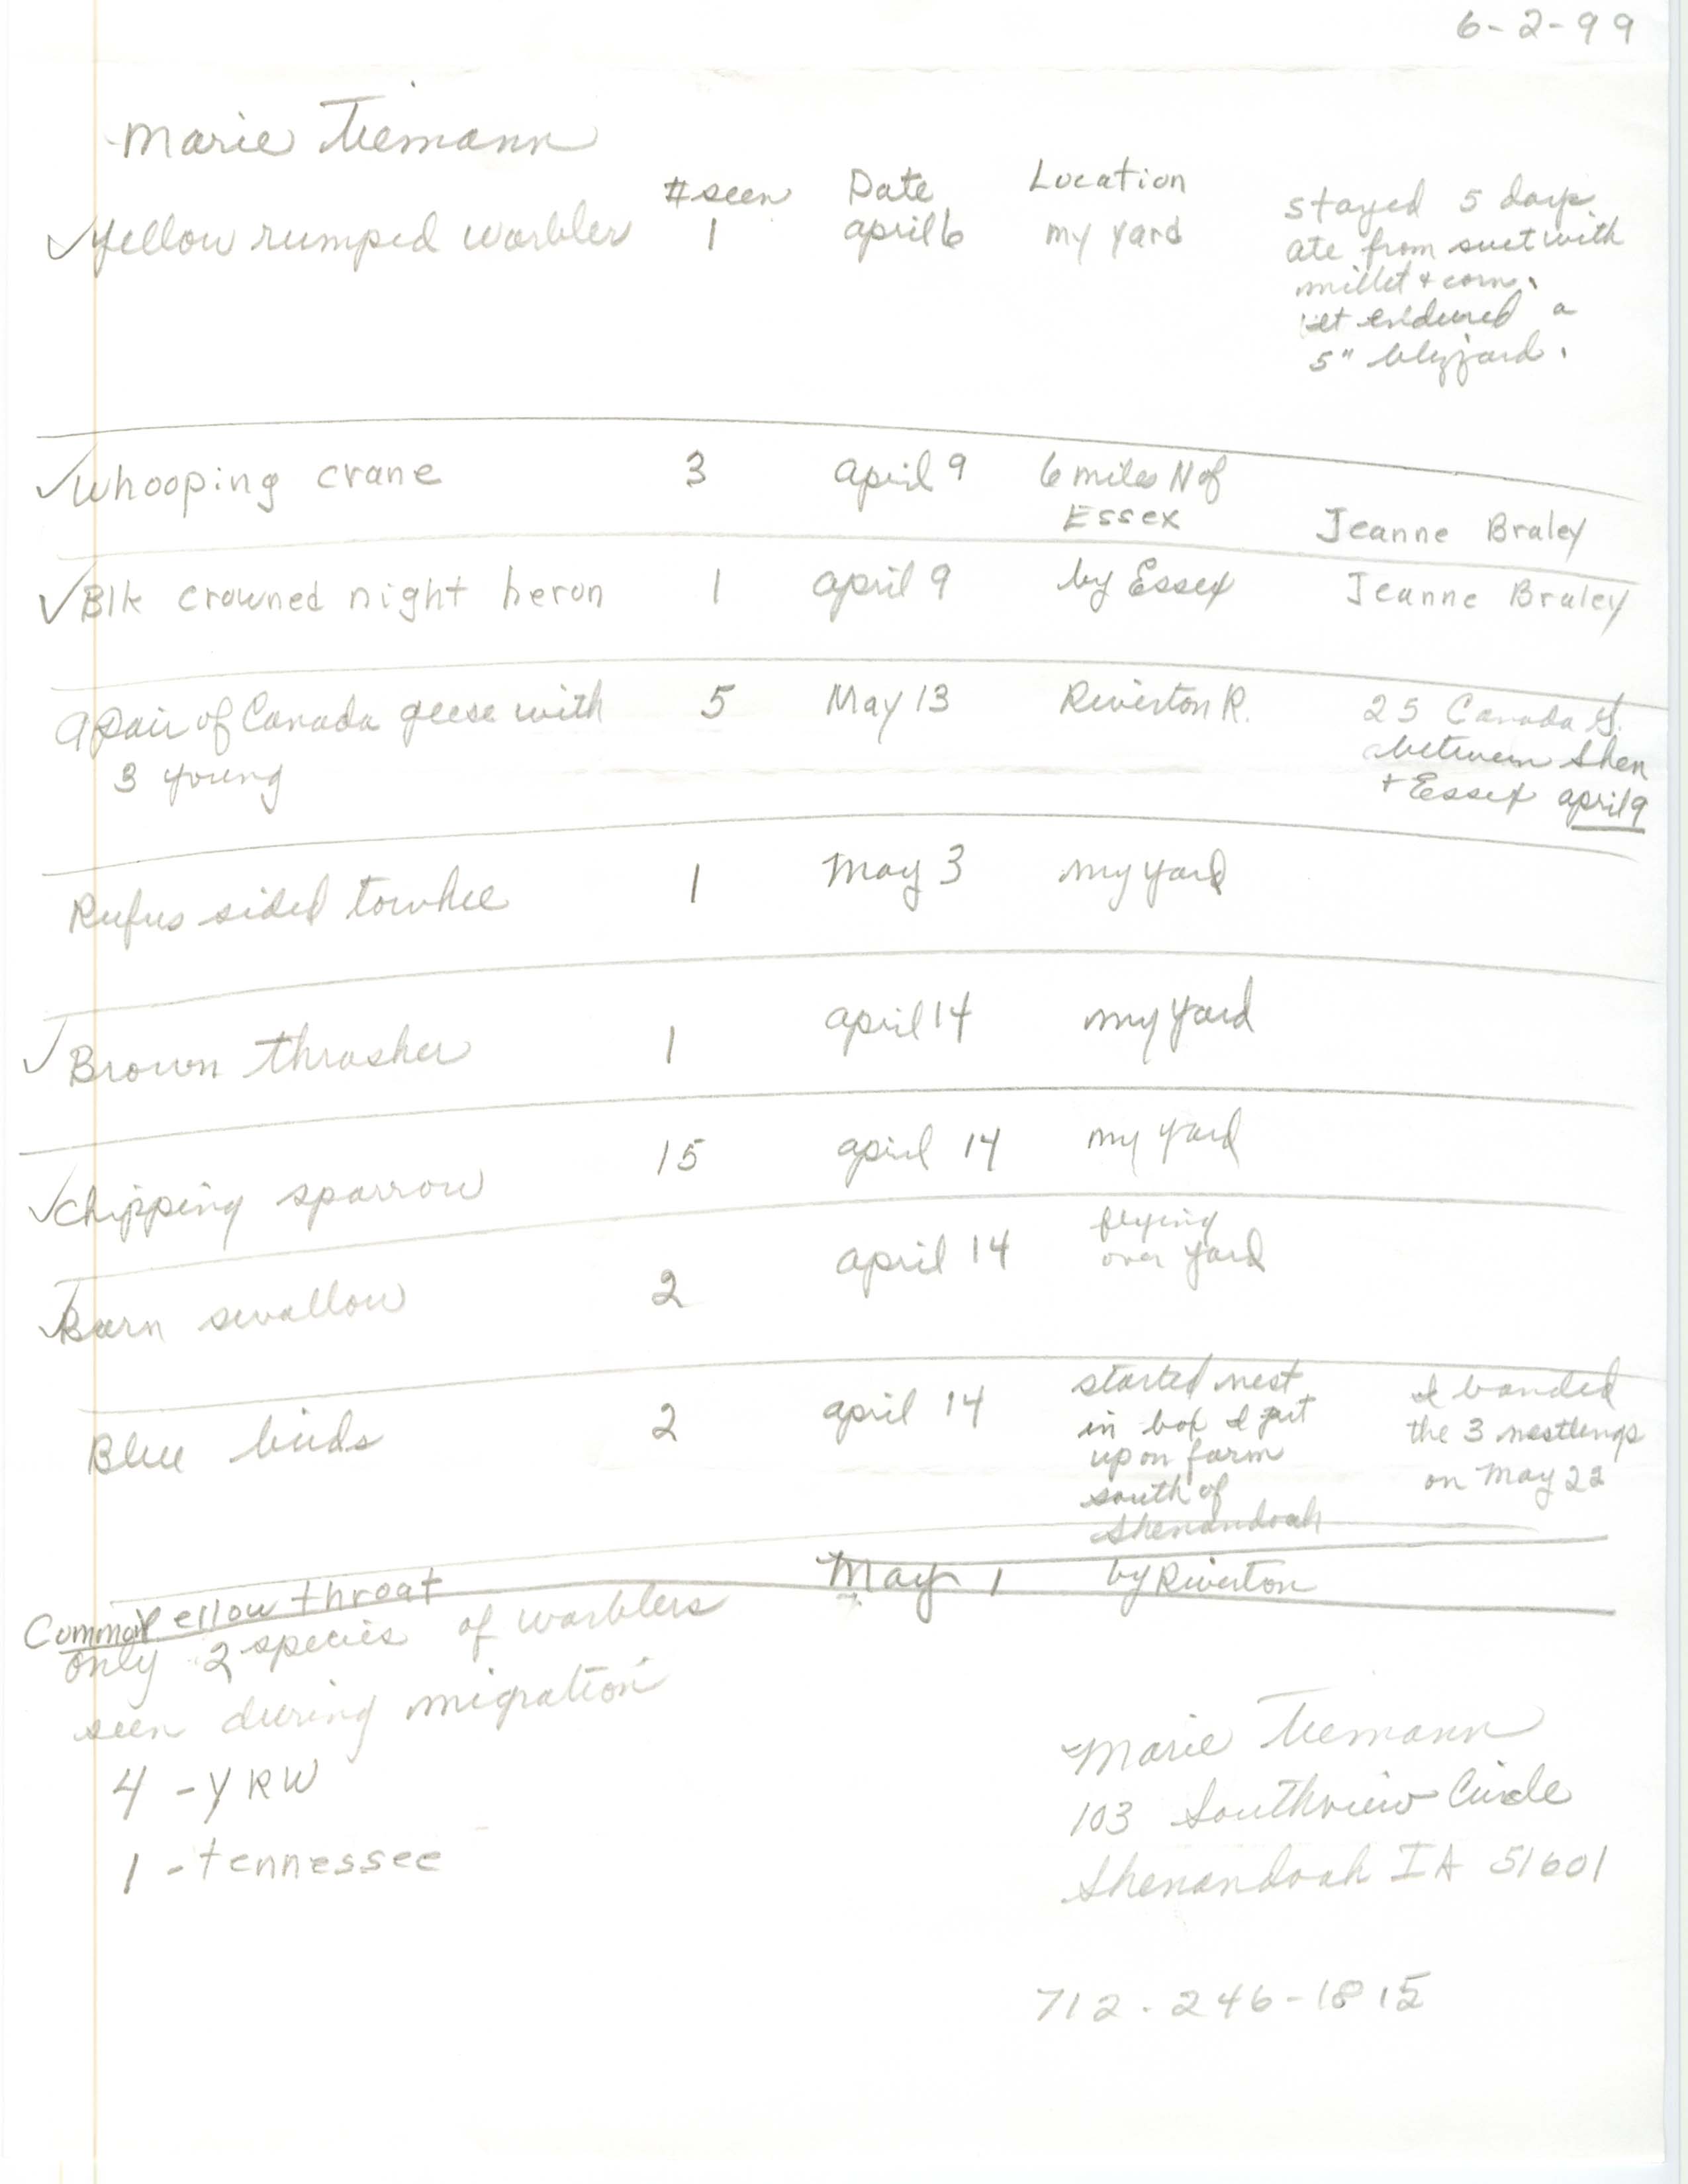 Annotated bird sighting list for spring 1999 compiled by Marie Tiemann, June 2, 1999